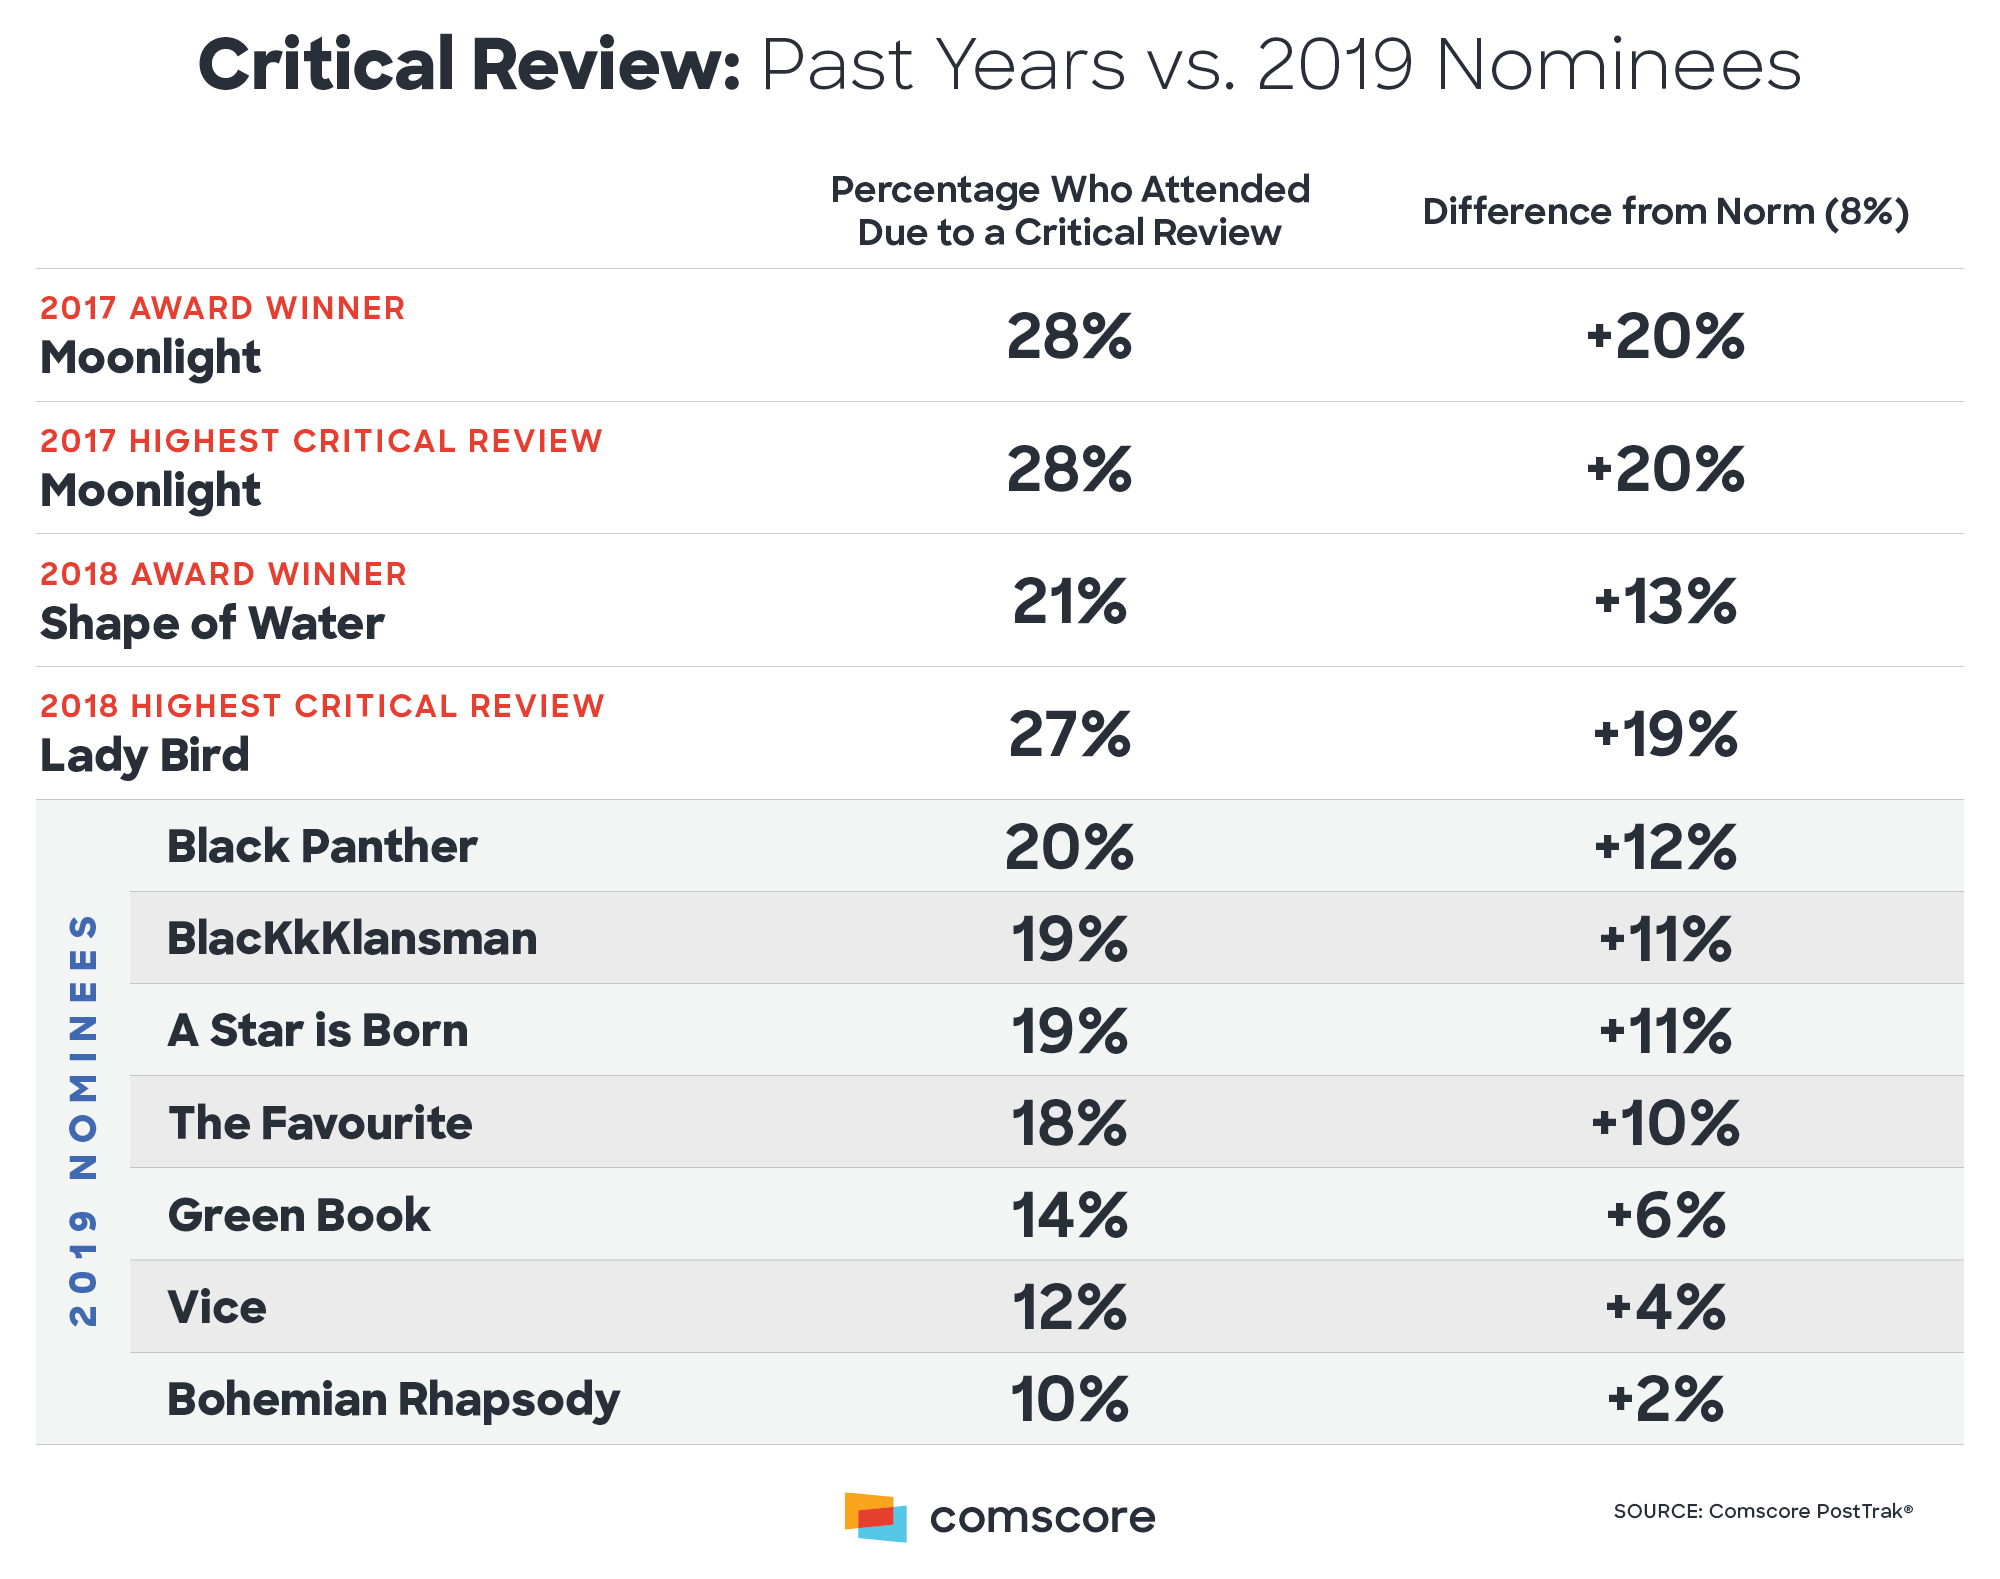 Can Audience Sentiment and Box Office Dollars Predict Oscar Wins?...